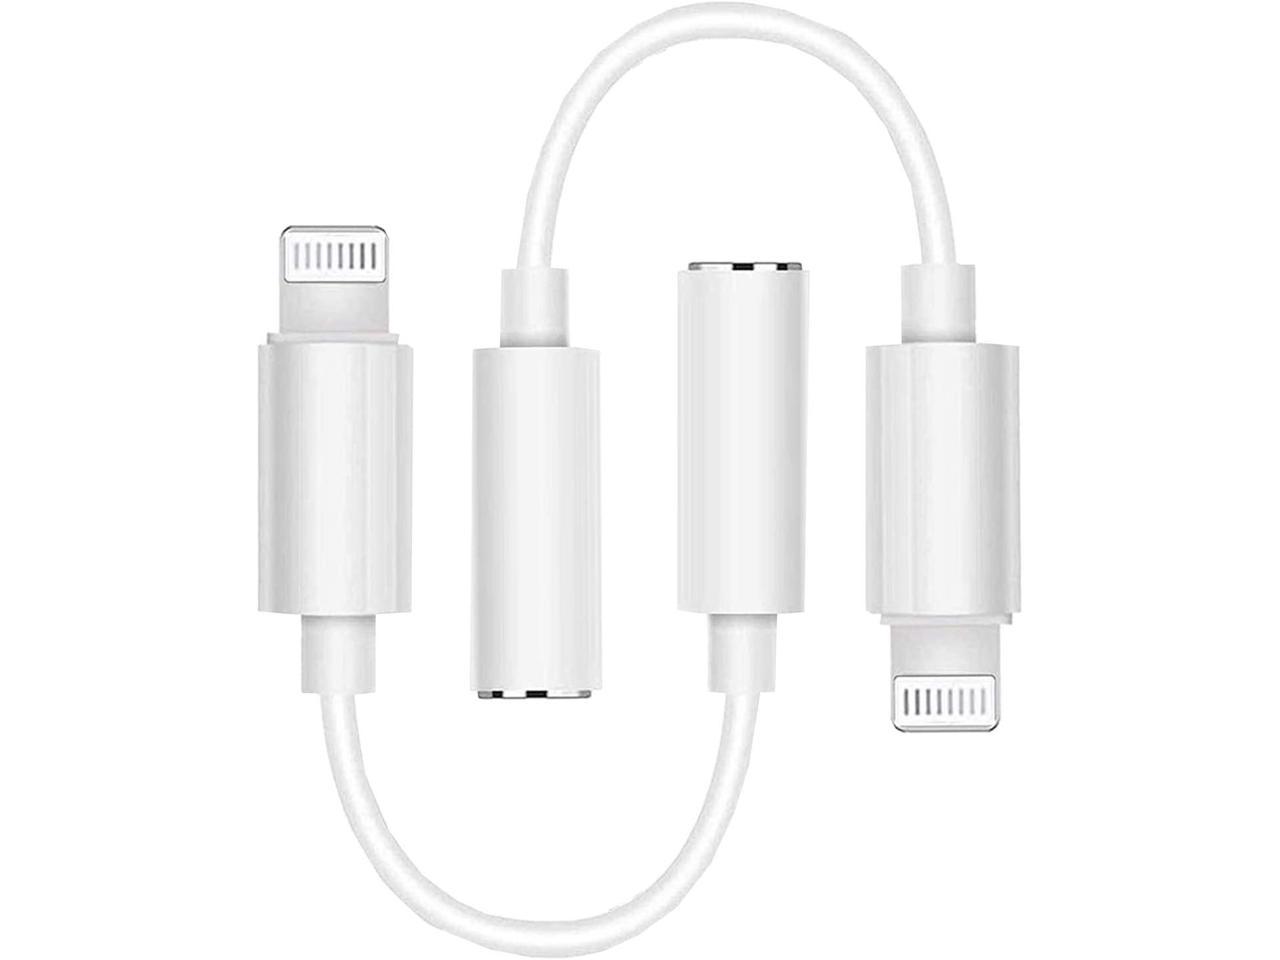 2 Pack Lighting to 3.5mm Headphones/Earbuds Jack Adapter Cellphone Cable Earphones/Headsets Converter Support iOS 12/11-Upgraded Compatible with iPhone XS/XR/X/8/8 Plus/7/7 Plus/ipad/iPod 